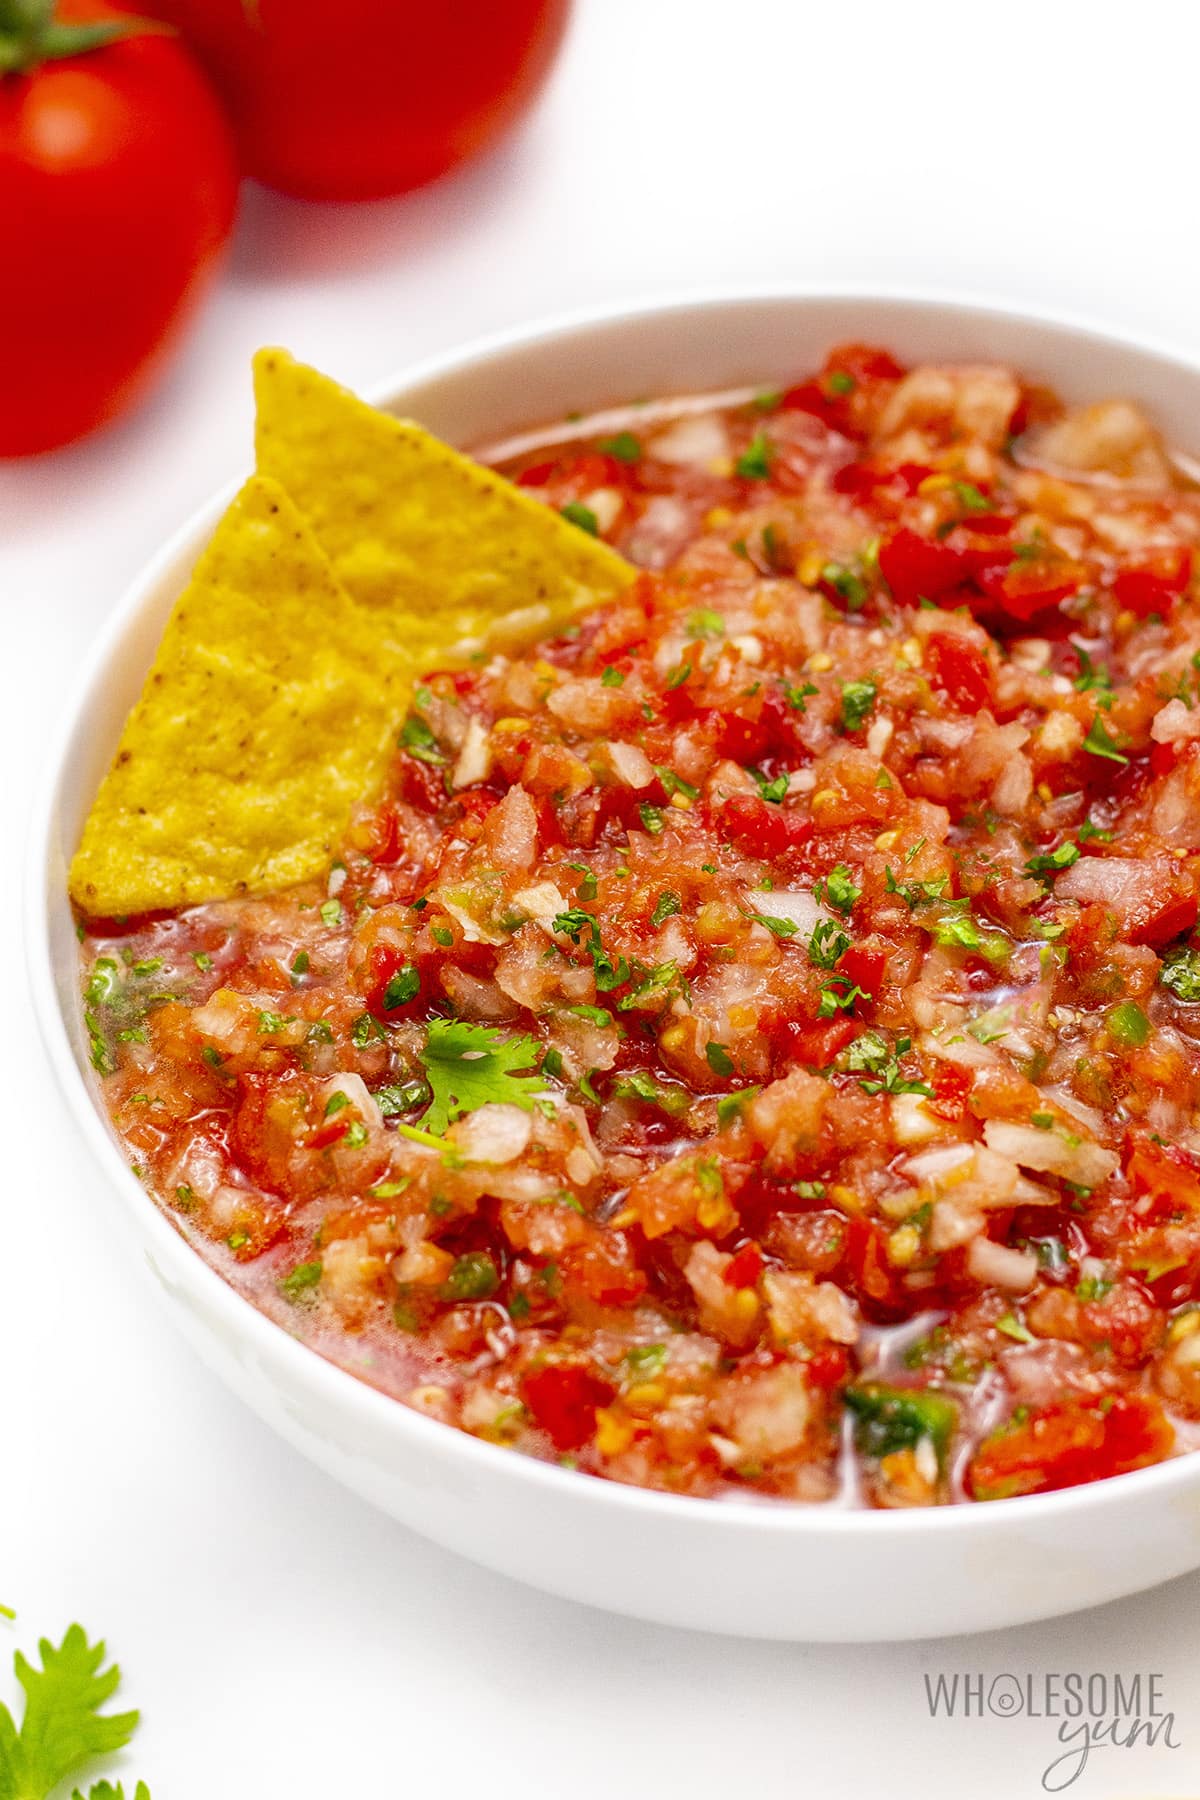 Fresh salsa recipe with two tortilla chips dipped.